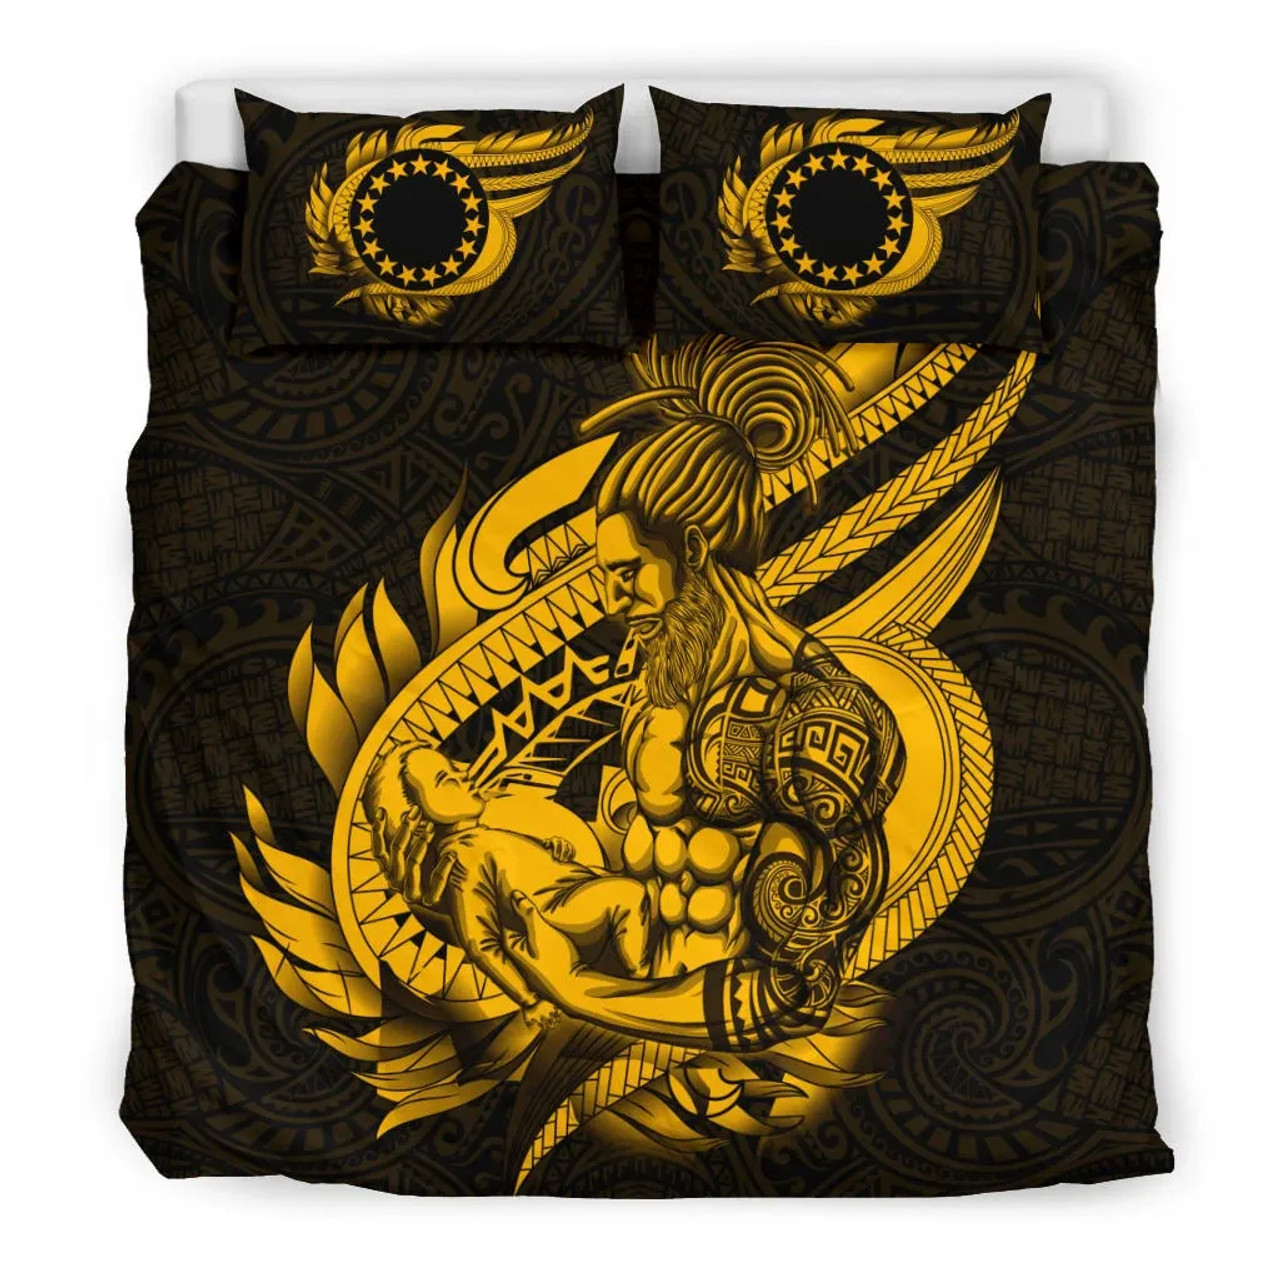 Polynesian Bedding Set - Cook Islands Duvet Cover Set Father And Son Gold 2